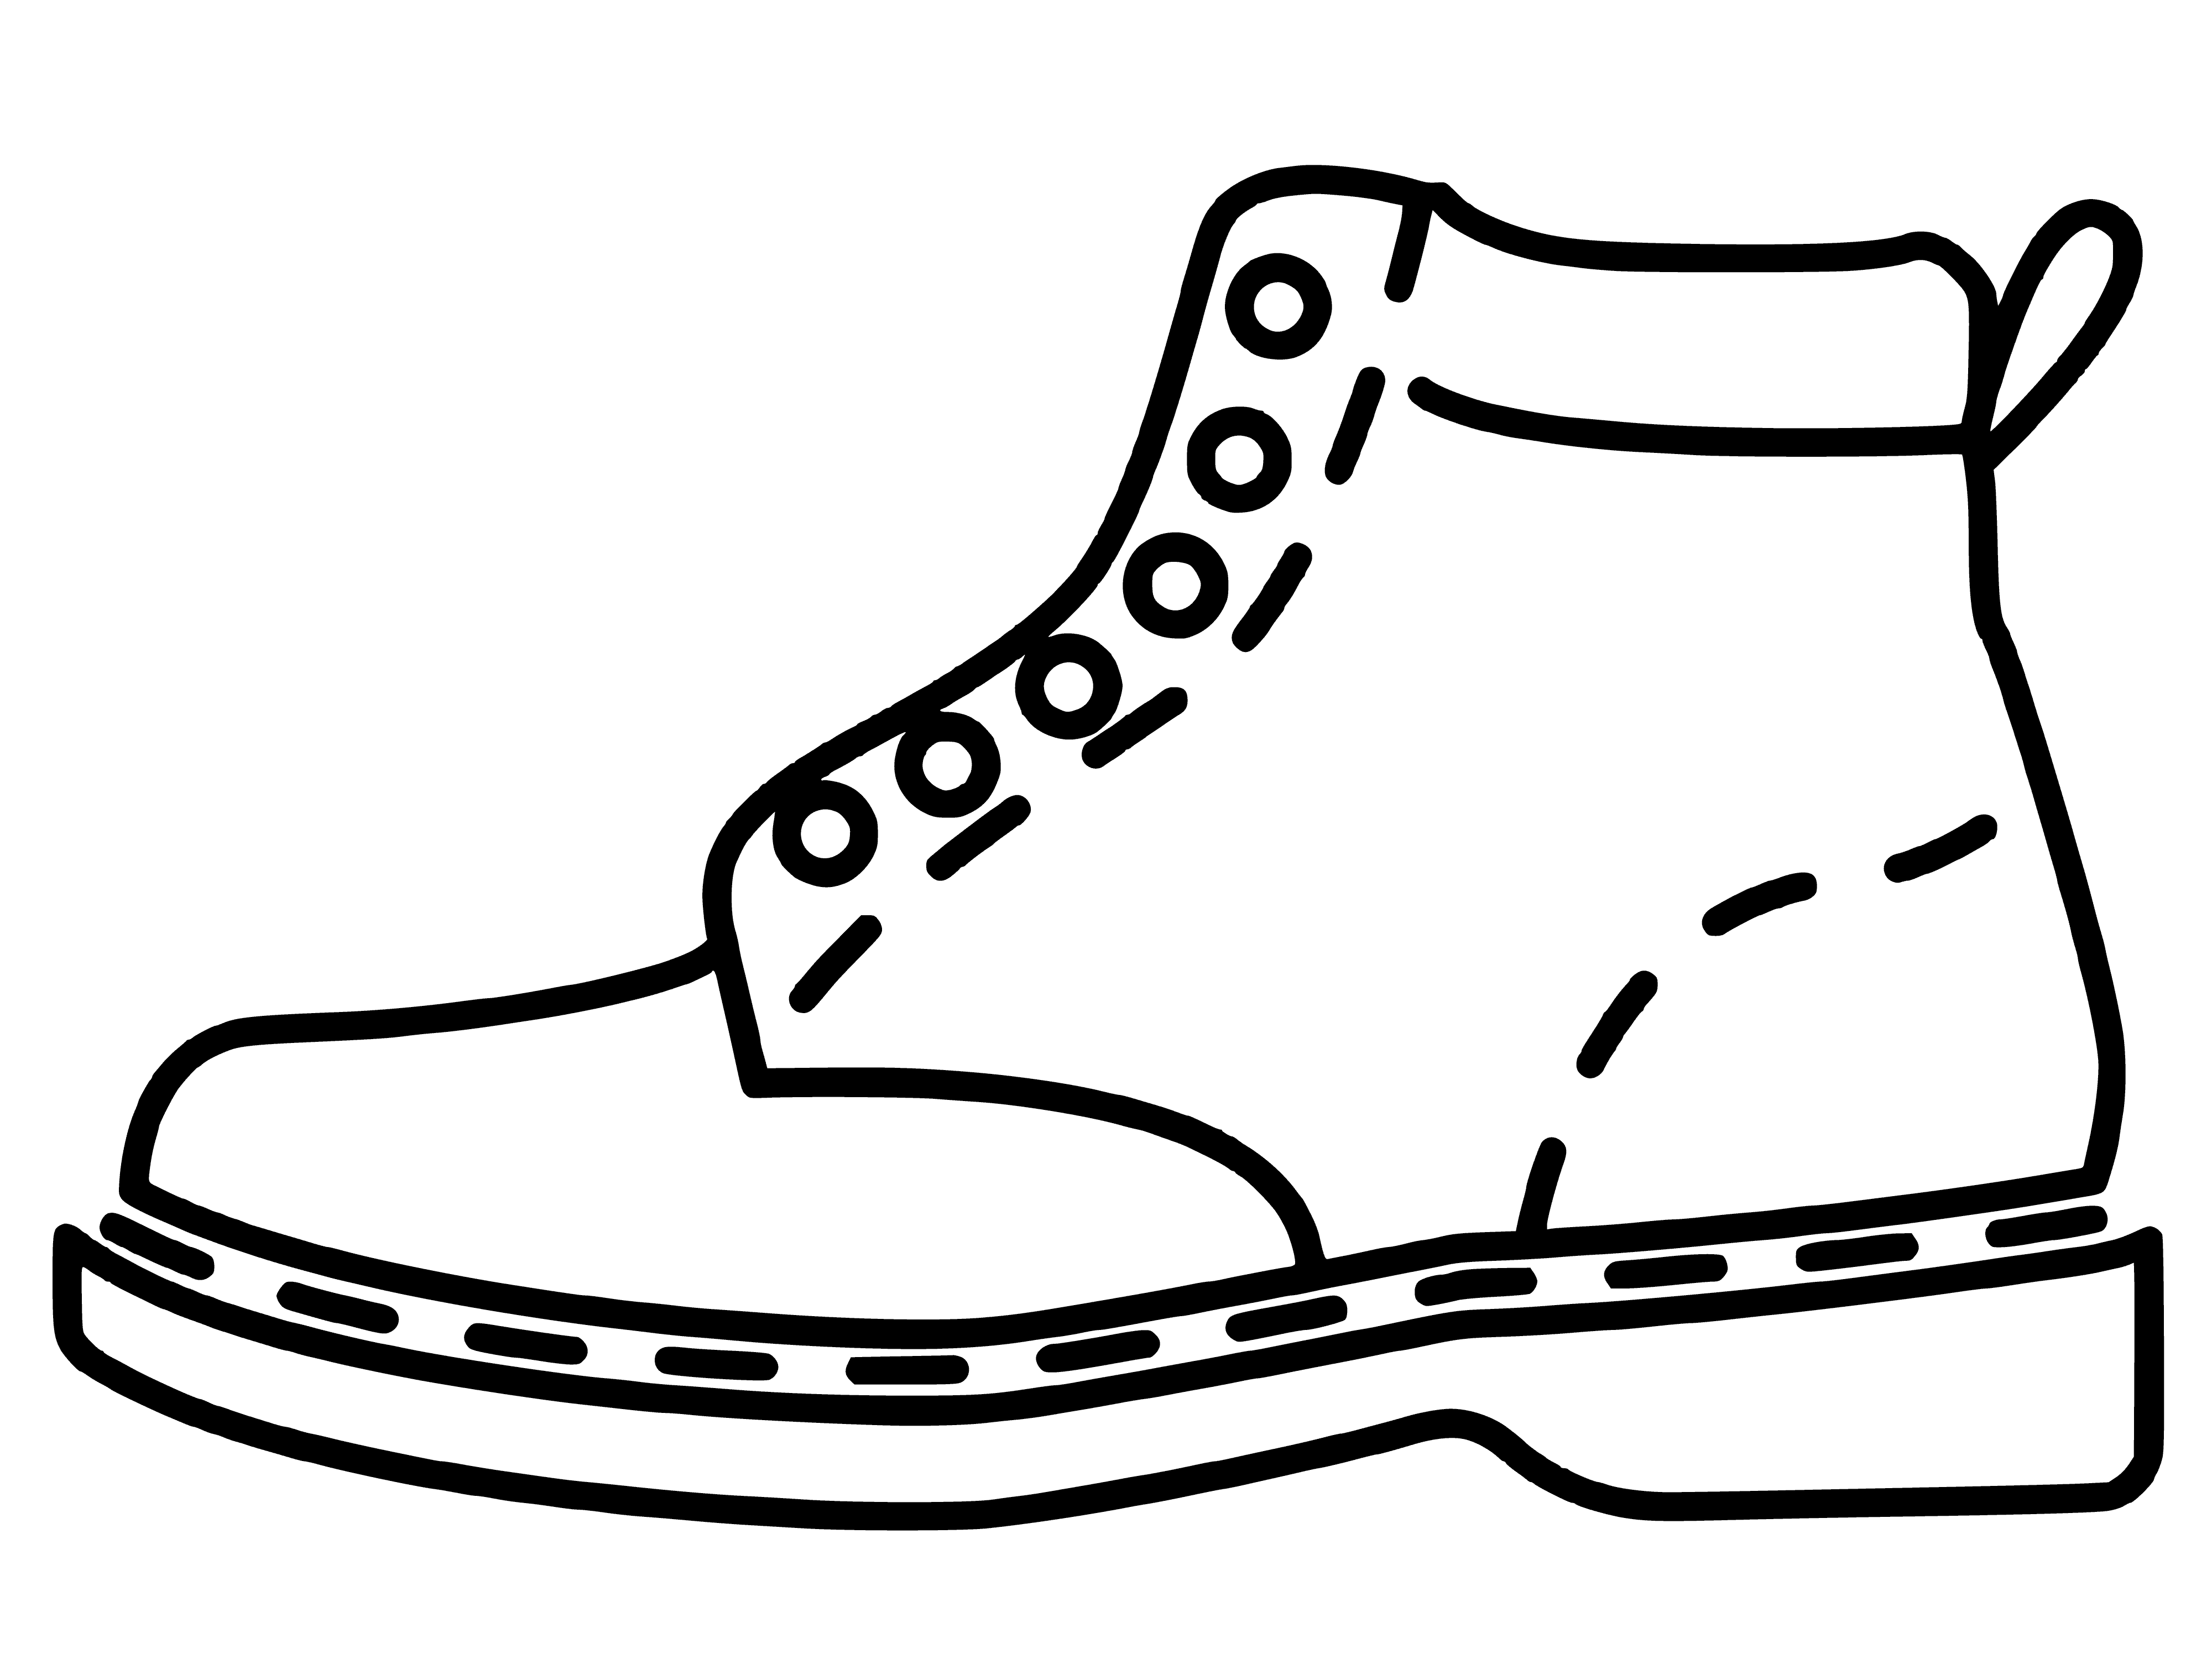 coloring page: Person wearing black boots with small heel, zip up the back, to the shin.